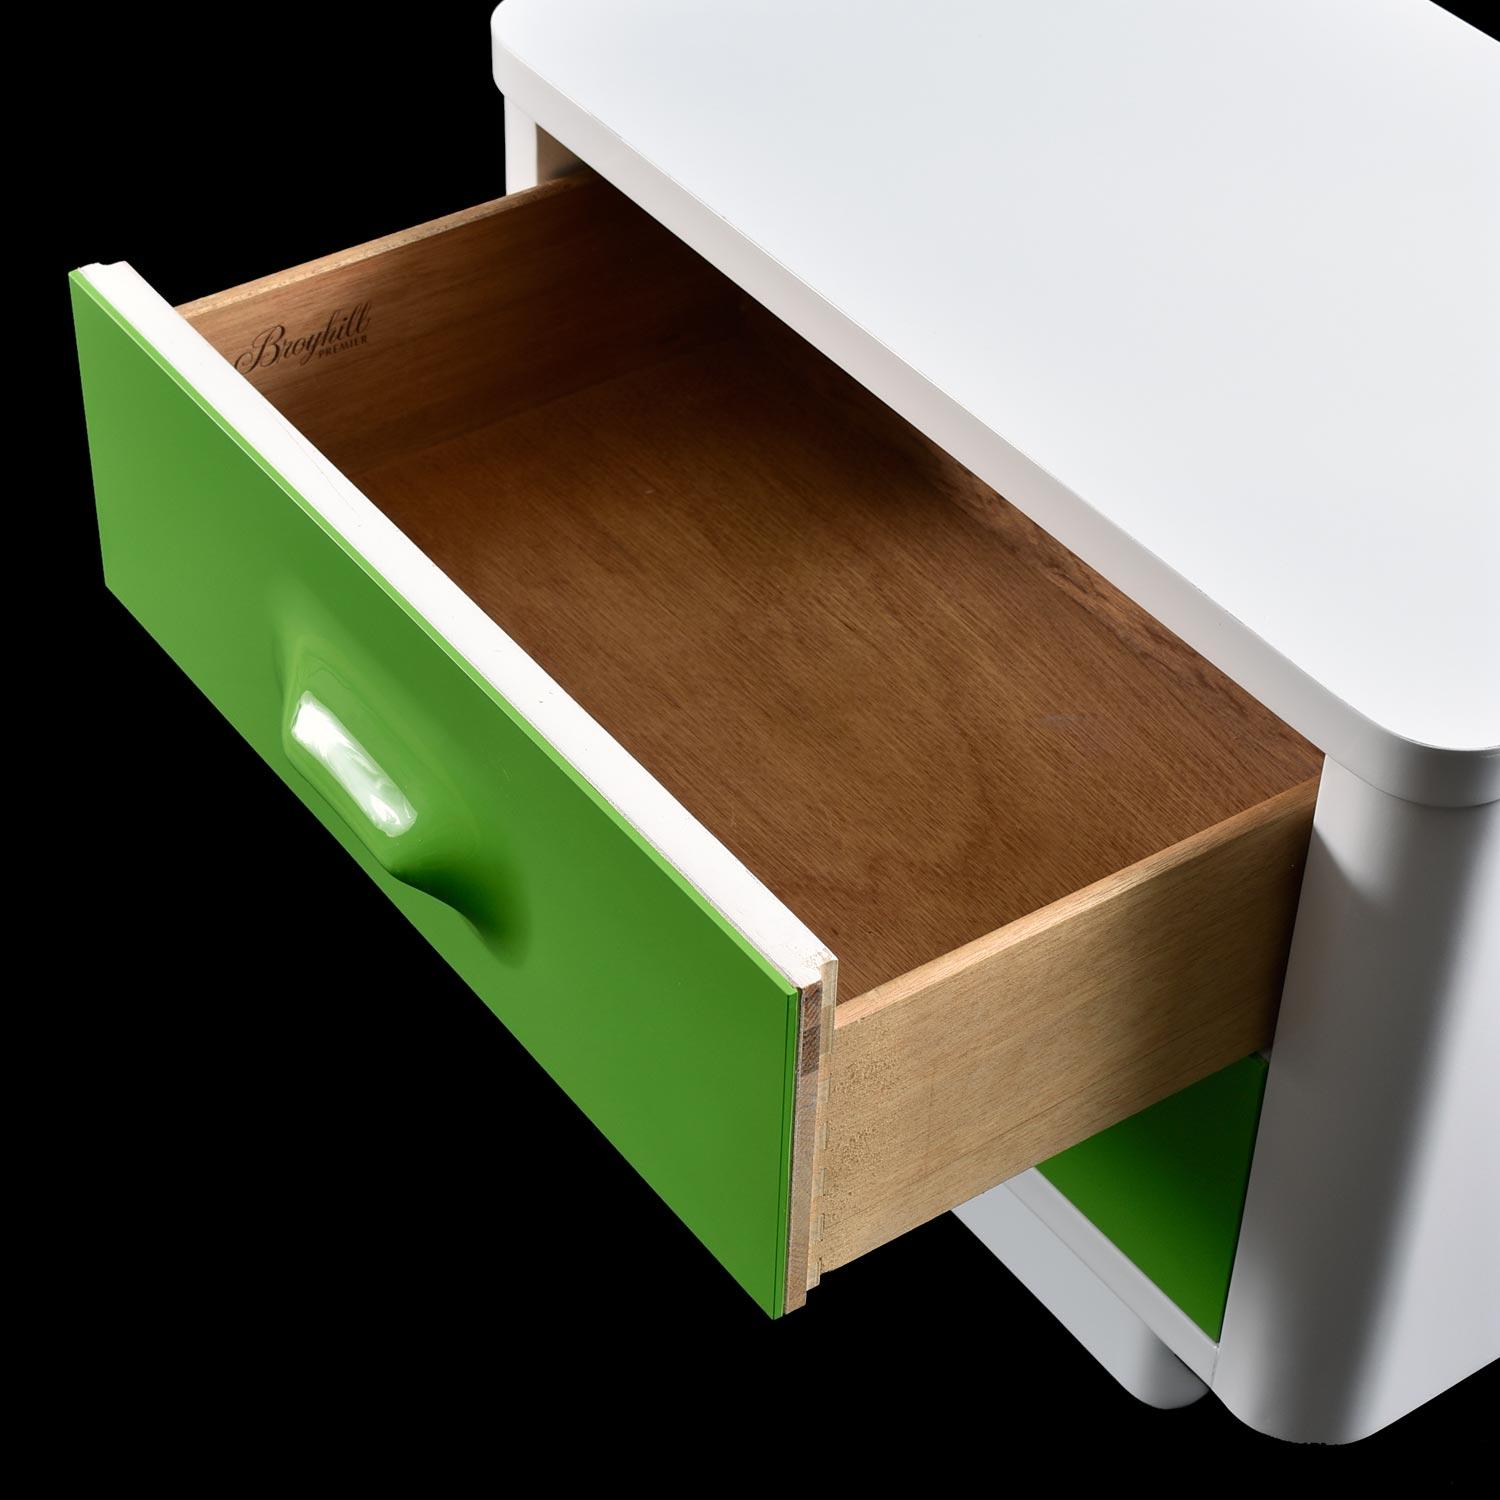 Space Age Pair of Raymond Loewy Inspired Green Chapter One Nightstands by Broyhill Premier